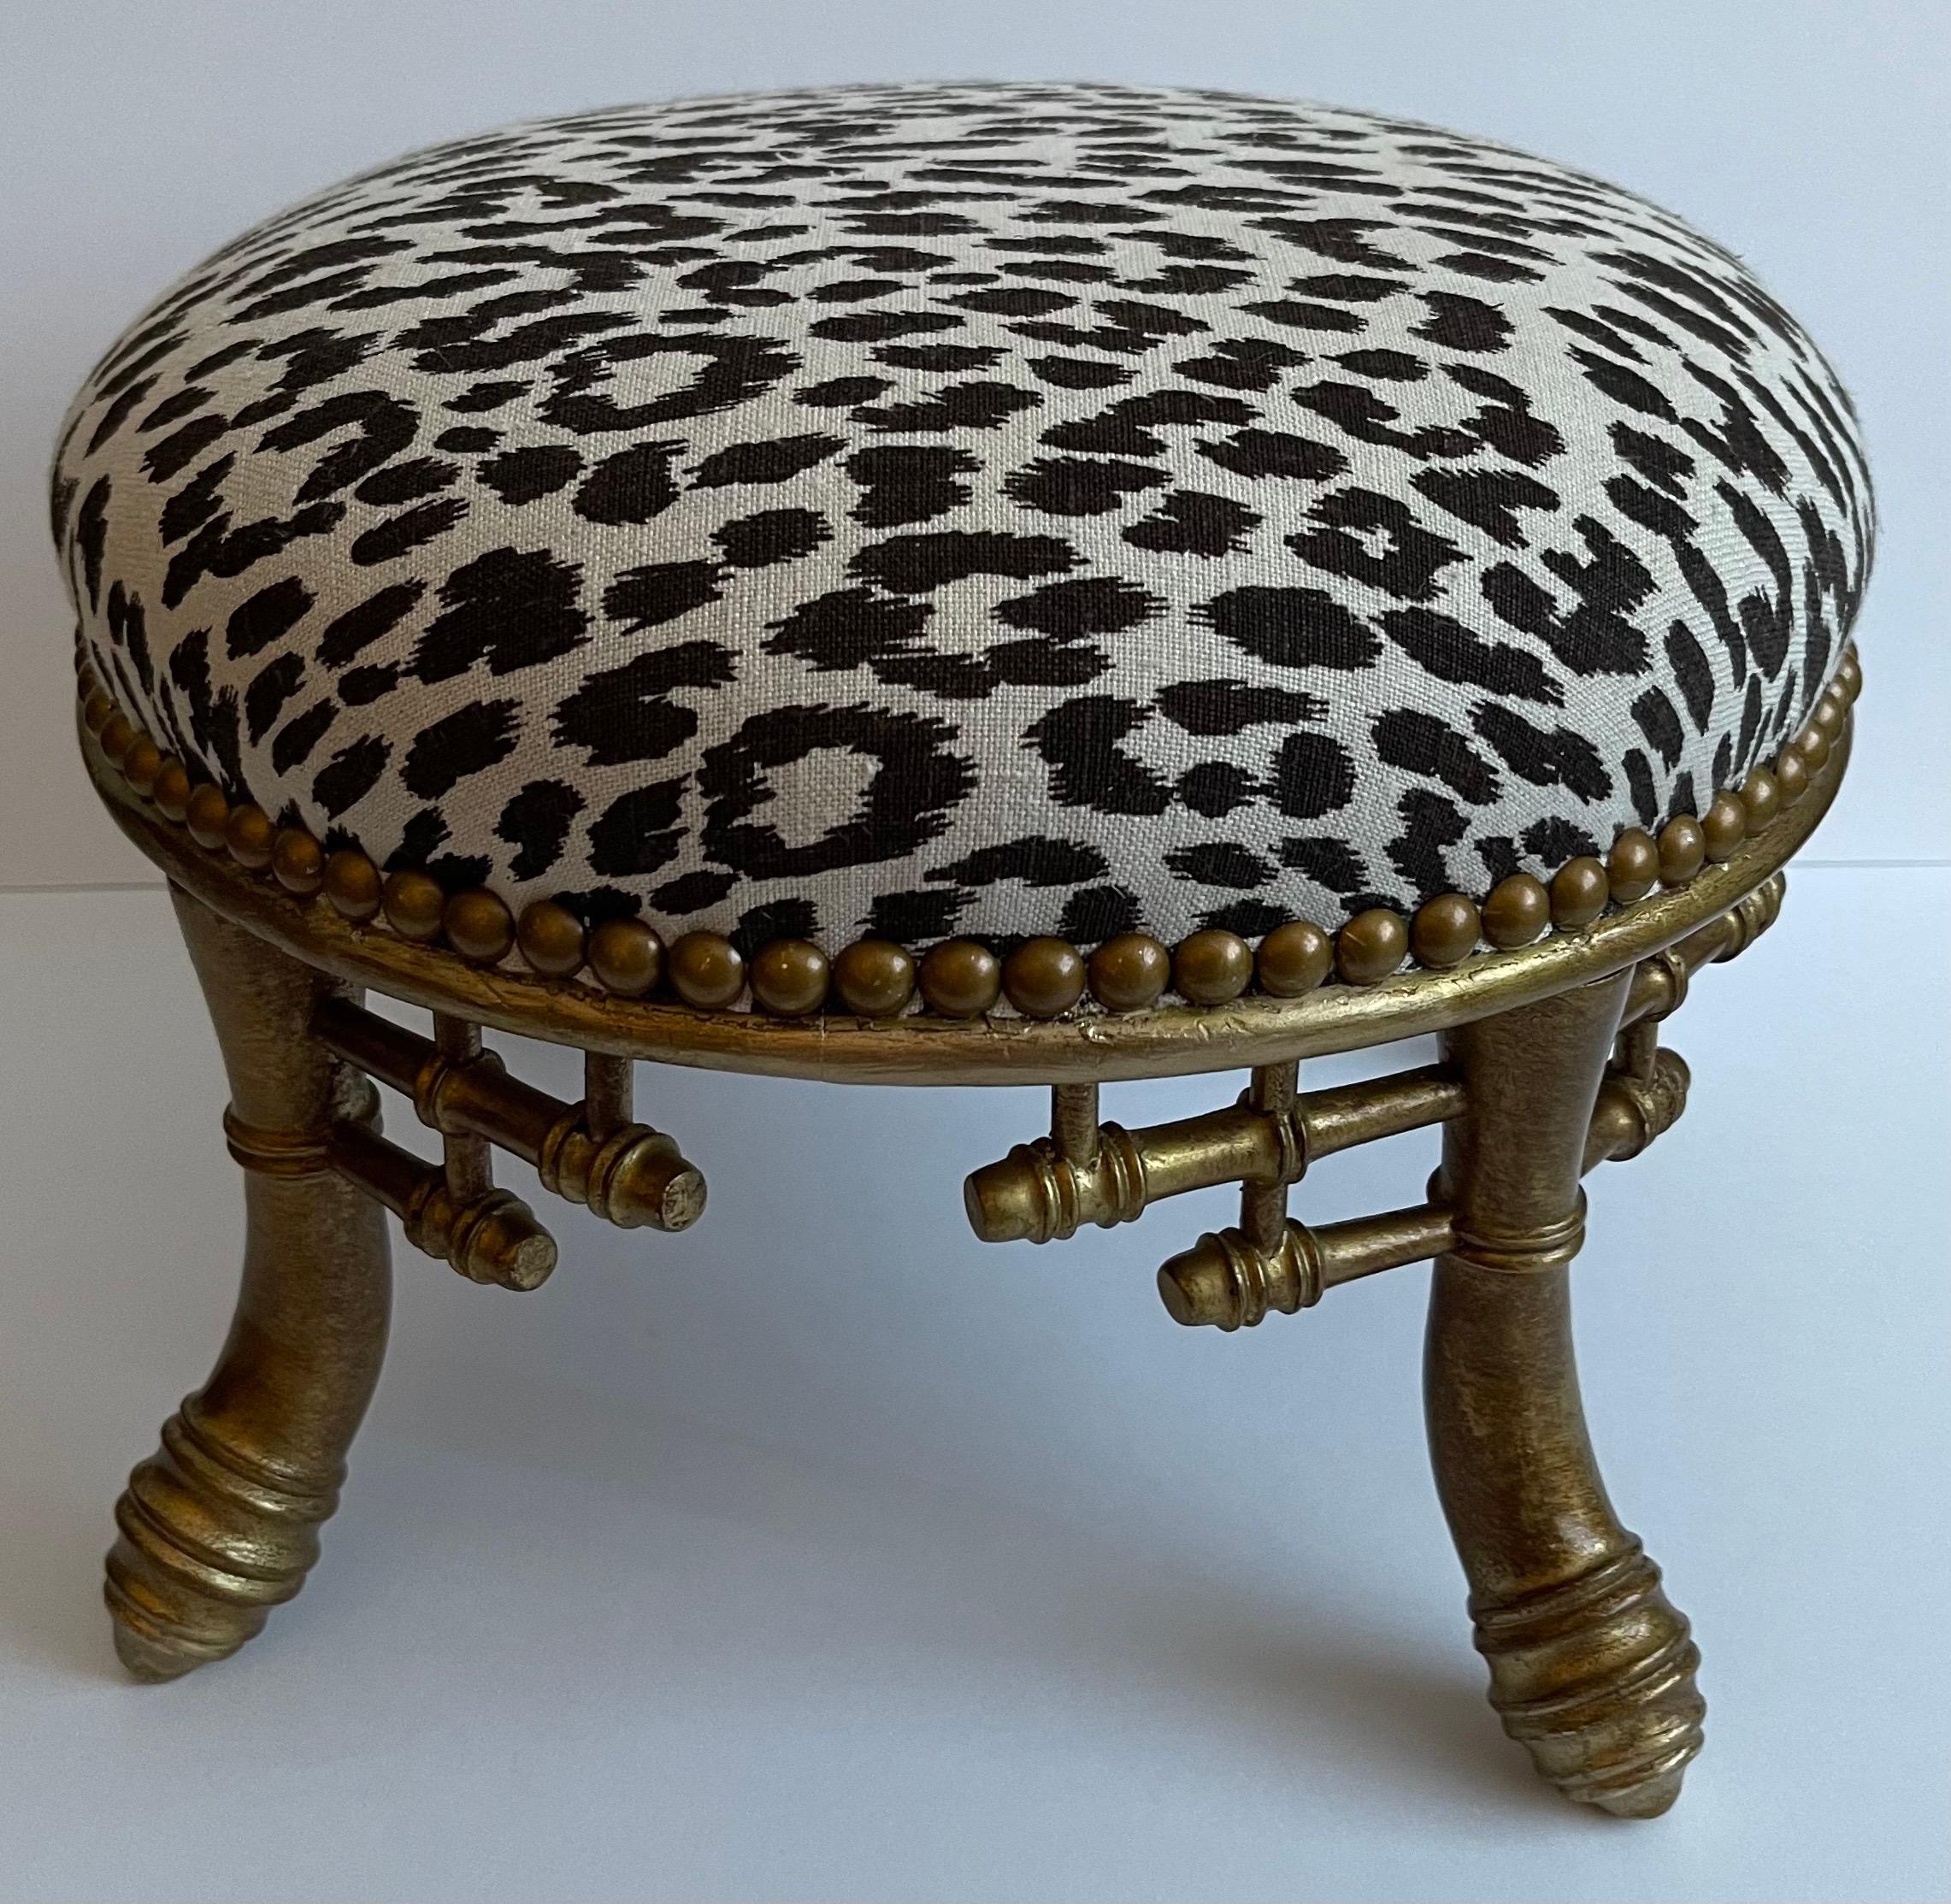 Small round antique giltwood bamboo stool. Newly upholstered in Raoul Textiles leopard linen fabric. Brass nailhead detailing.